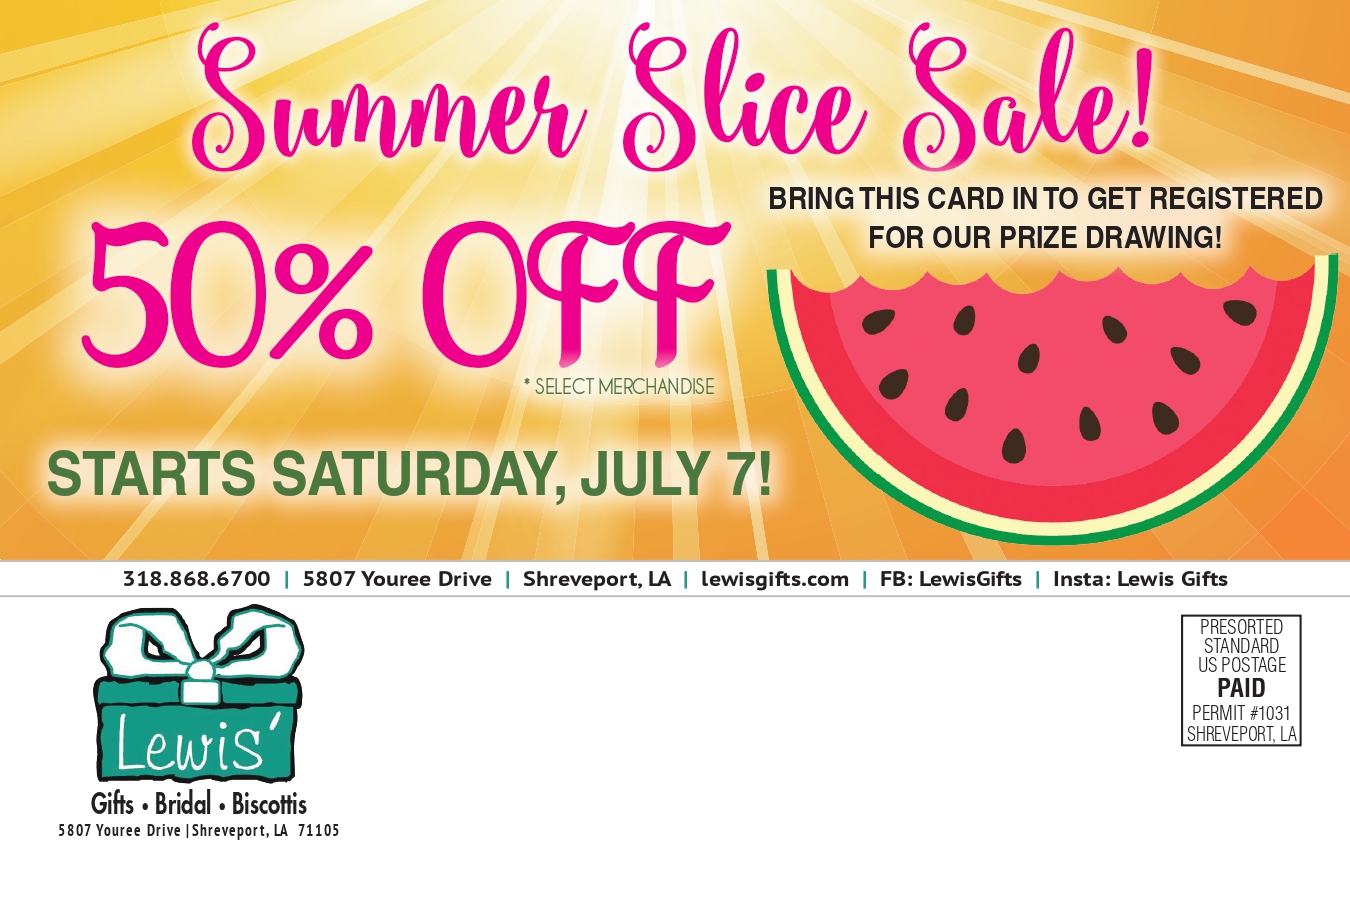 LGIFT Summer Slice Direct Mail Page 2